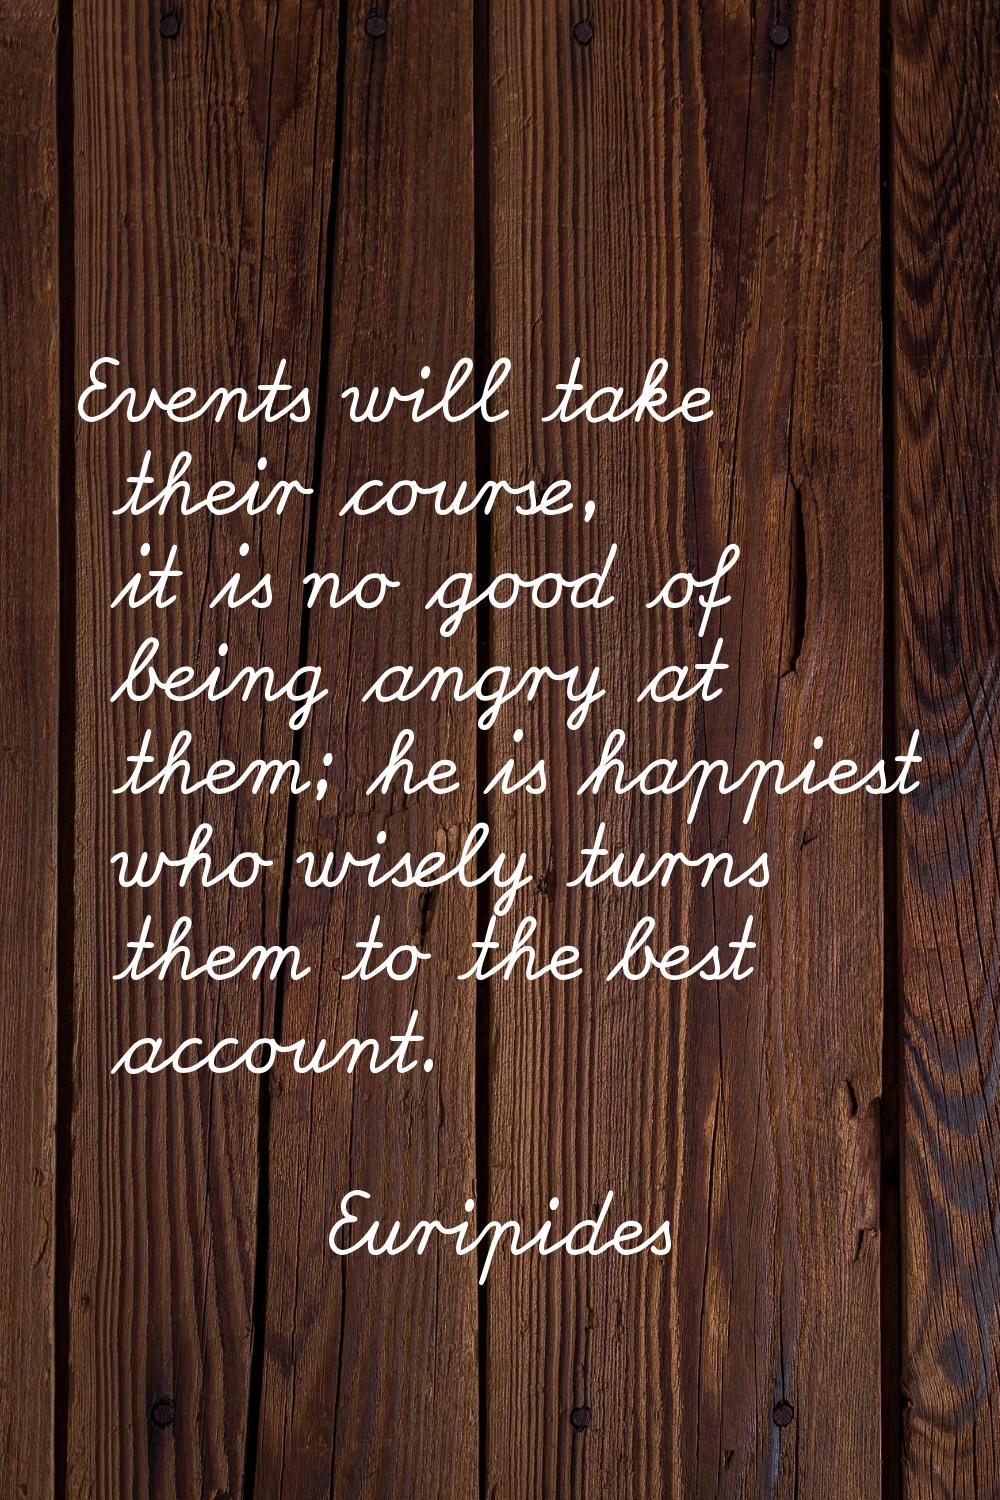 Events will take their course, it is no good of being angry at them; he is happiest who wisely turn